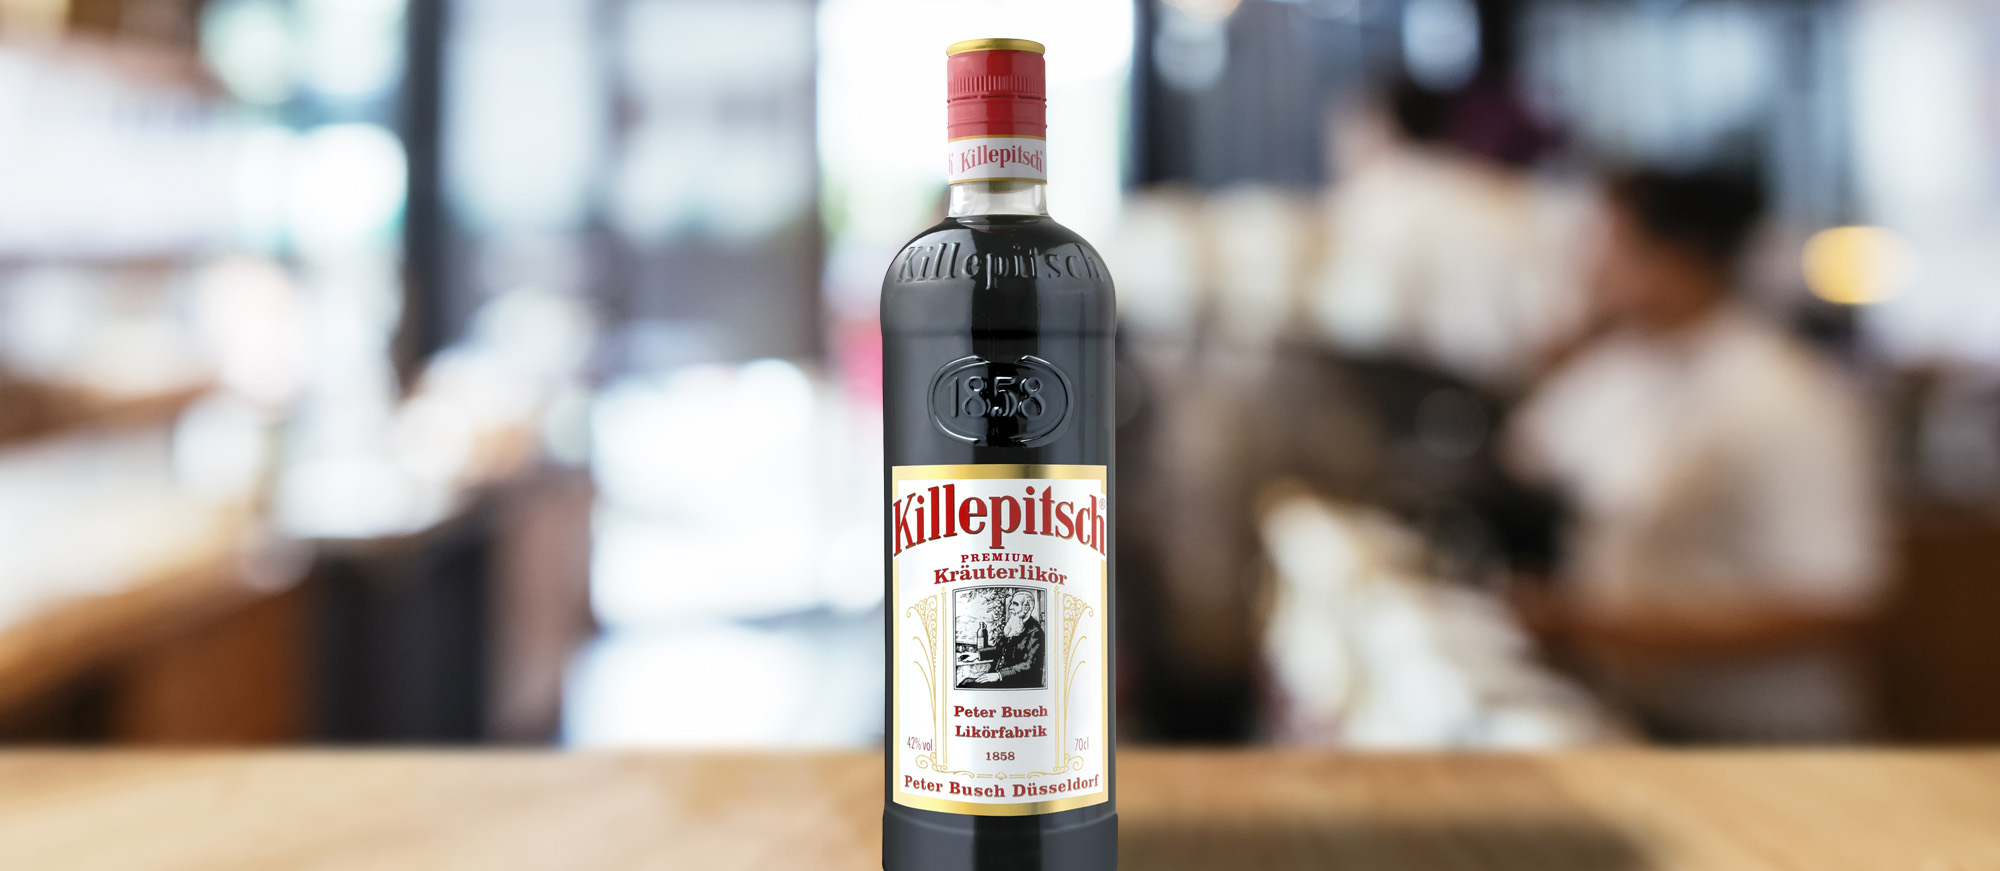 How do you drink Killepitsch?